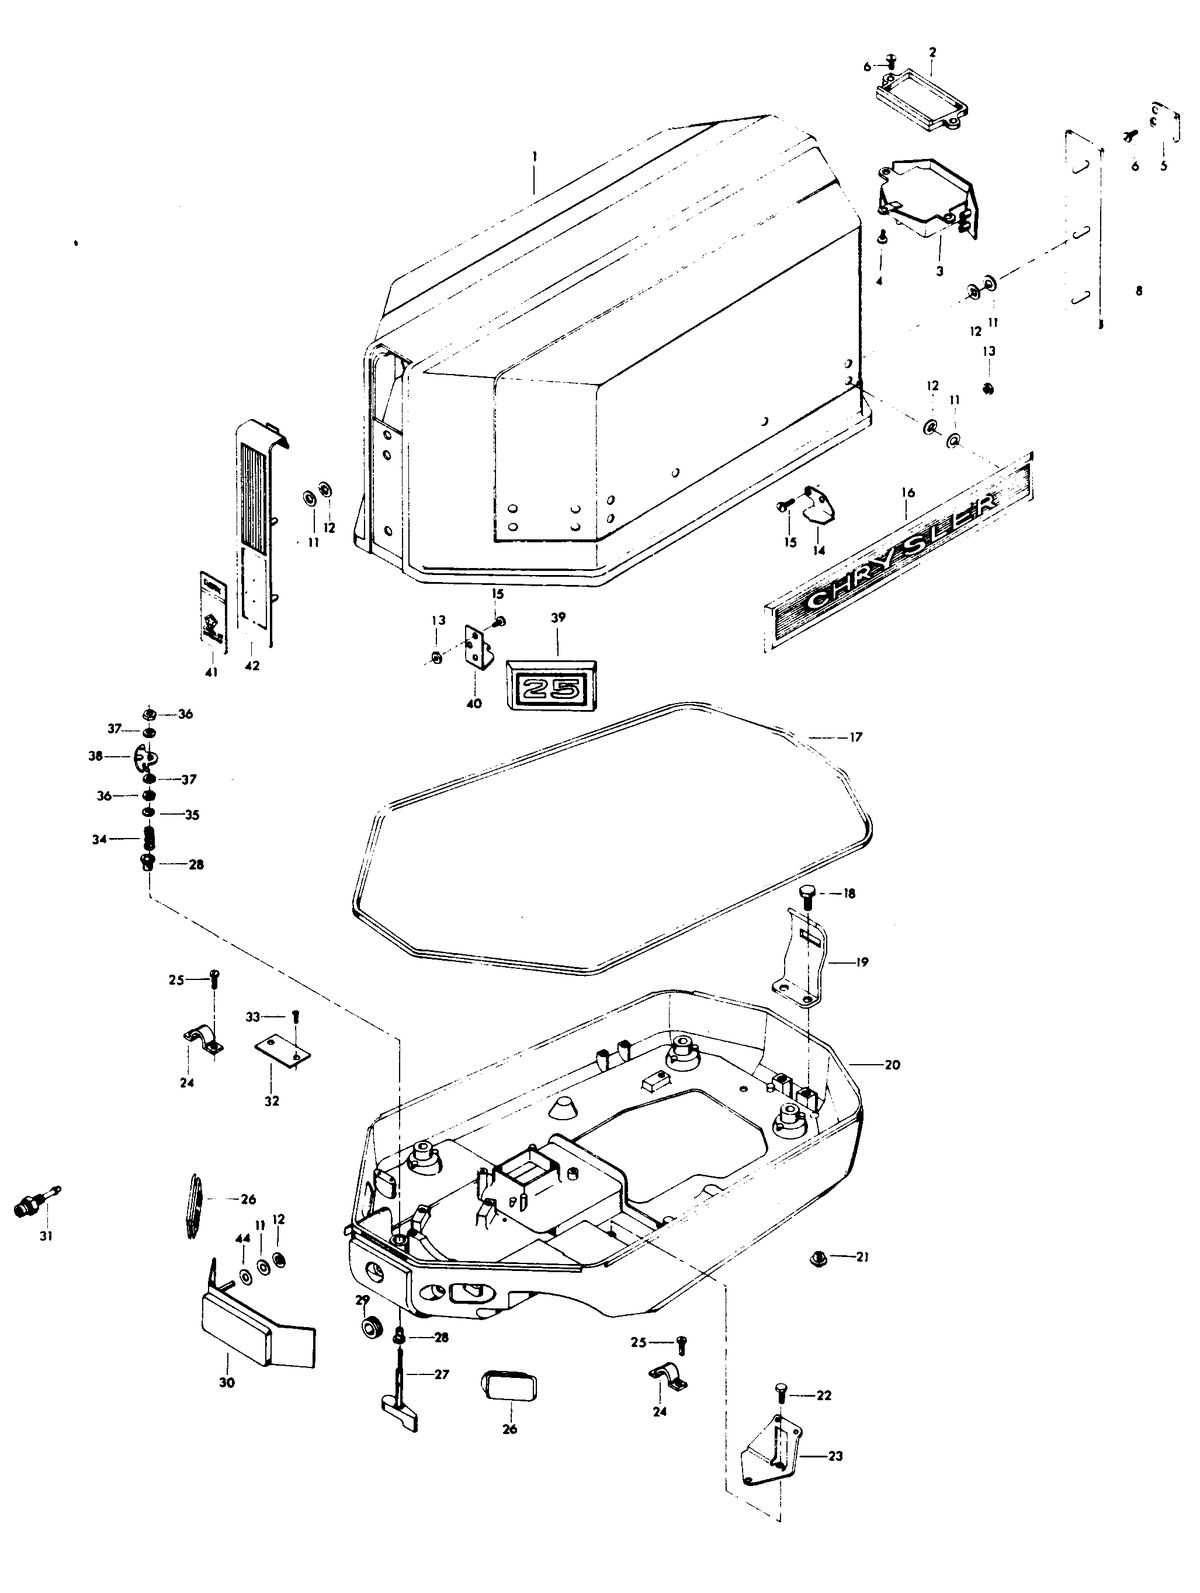 CHRYSLER 25 H.P. ENGINE COVER AND SUPPORT PLATE (ELECTRIC START MODELS)